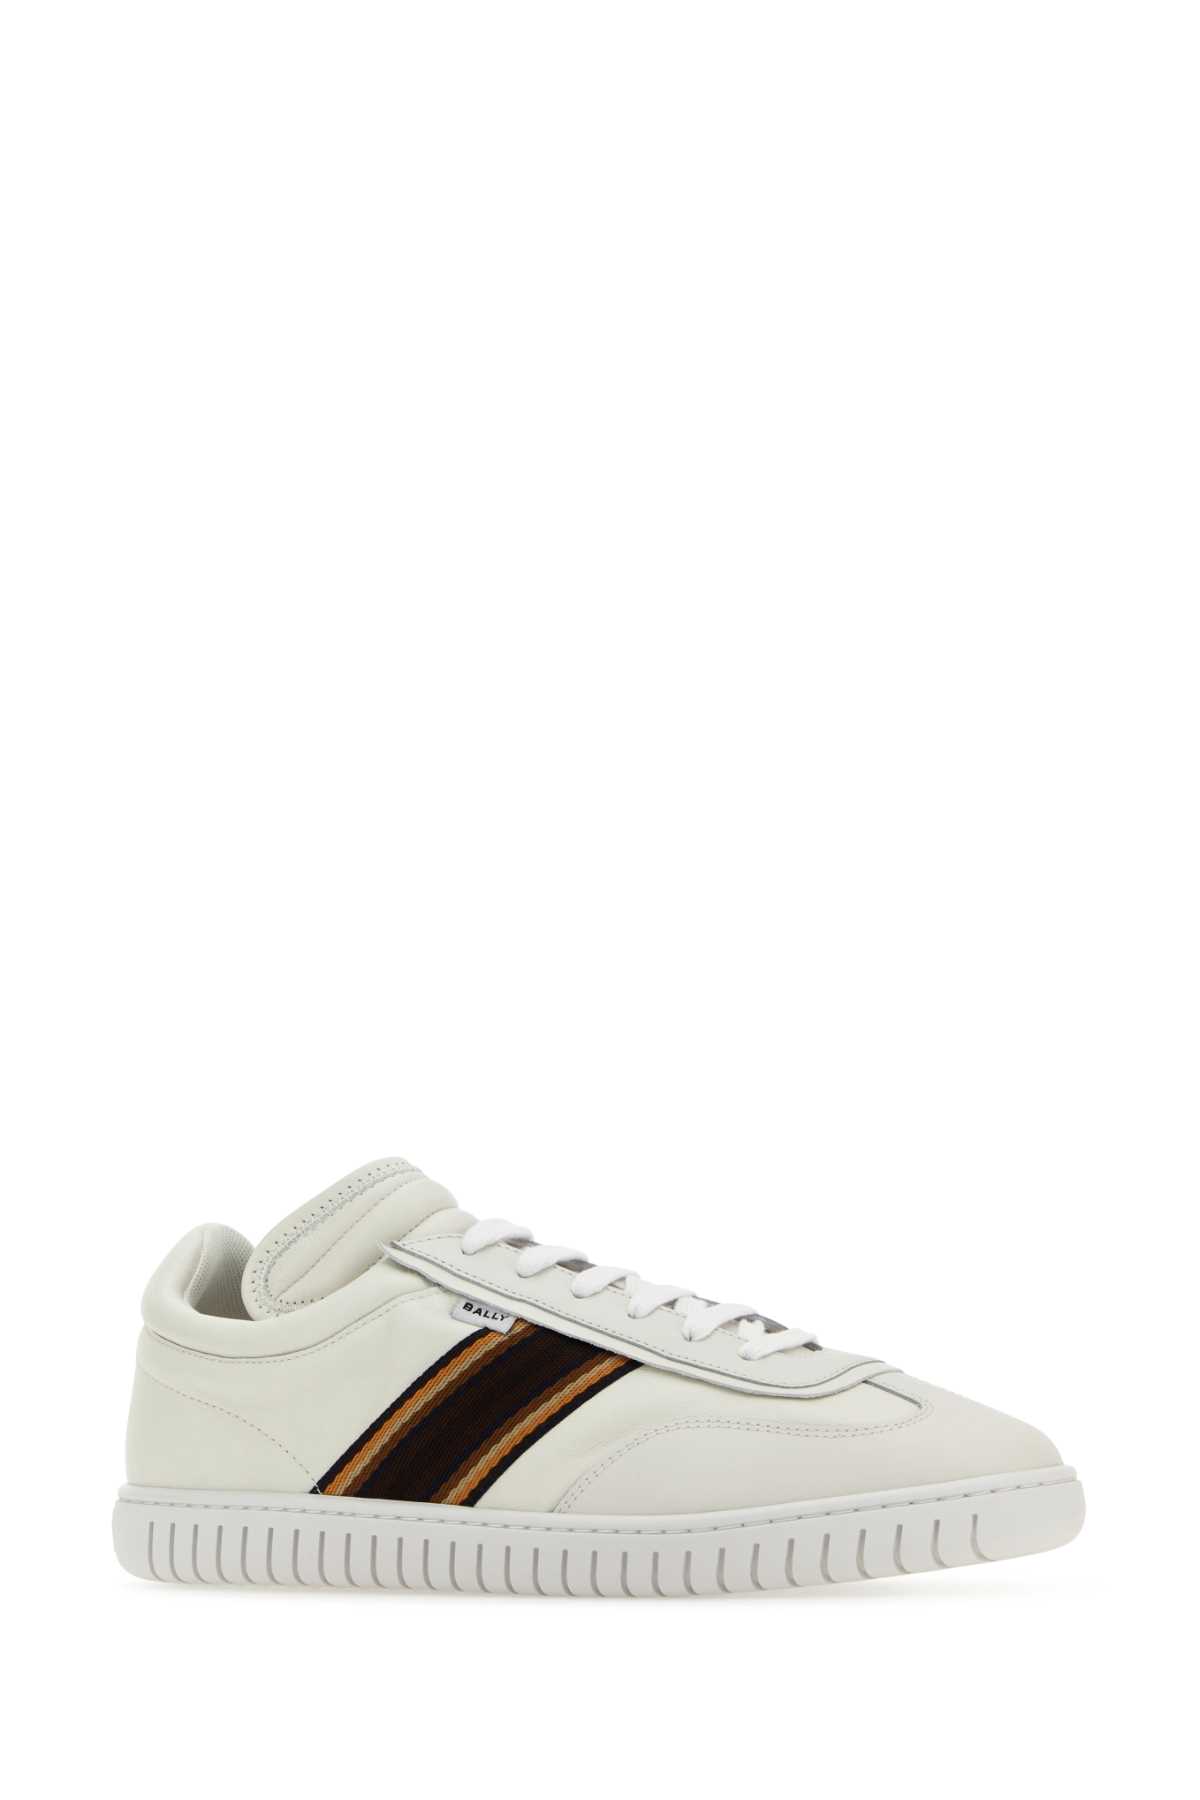 Shop Bally White Leather Parrel Sneakers